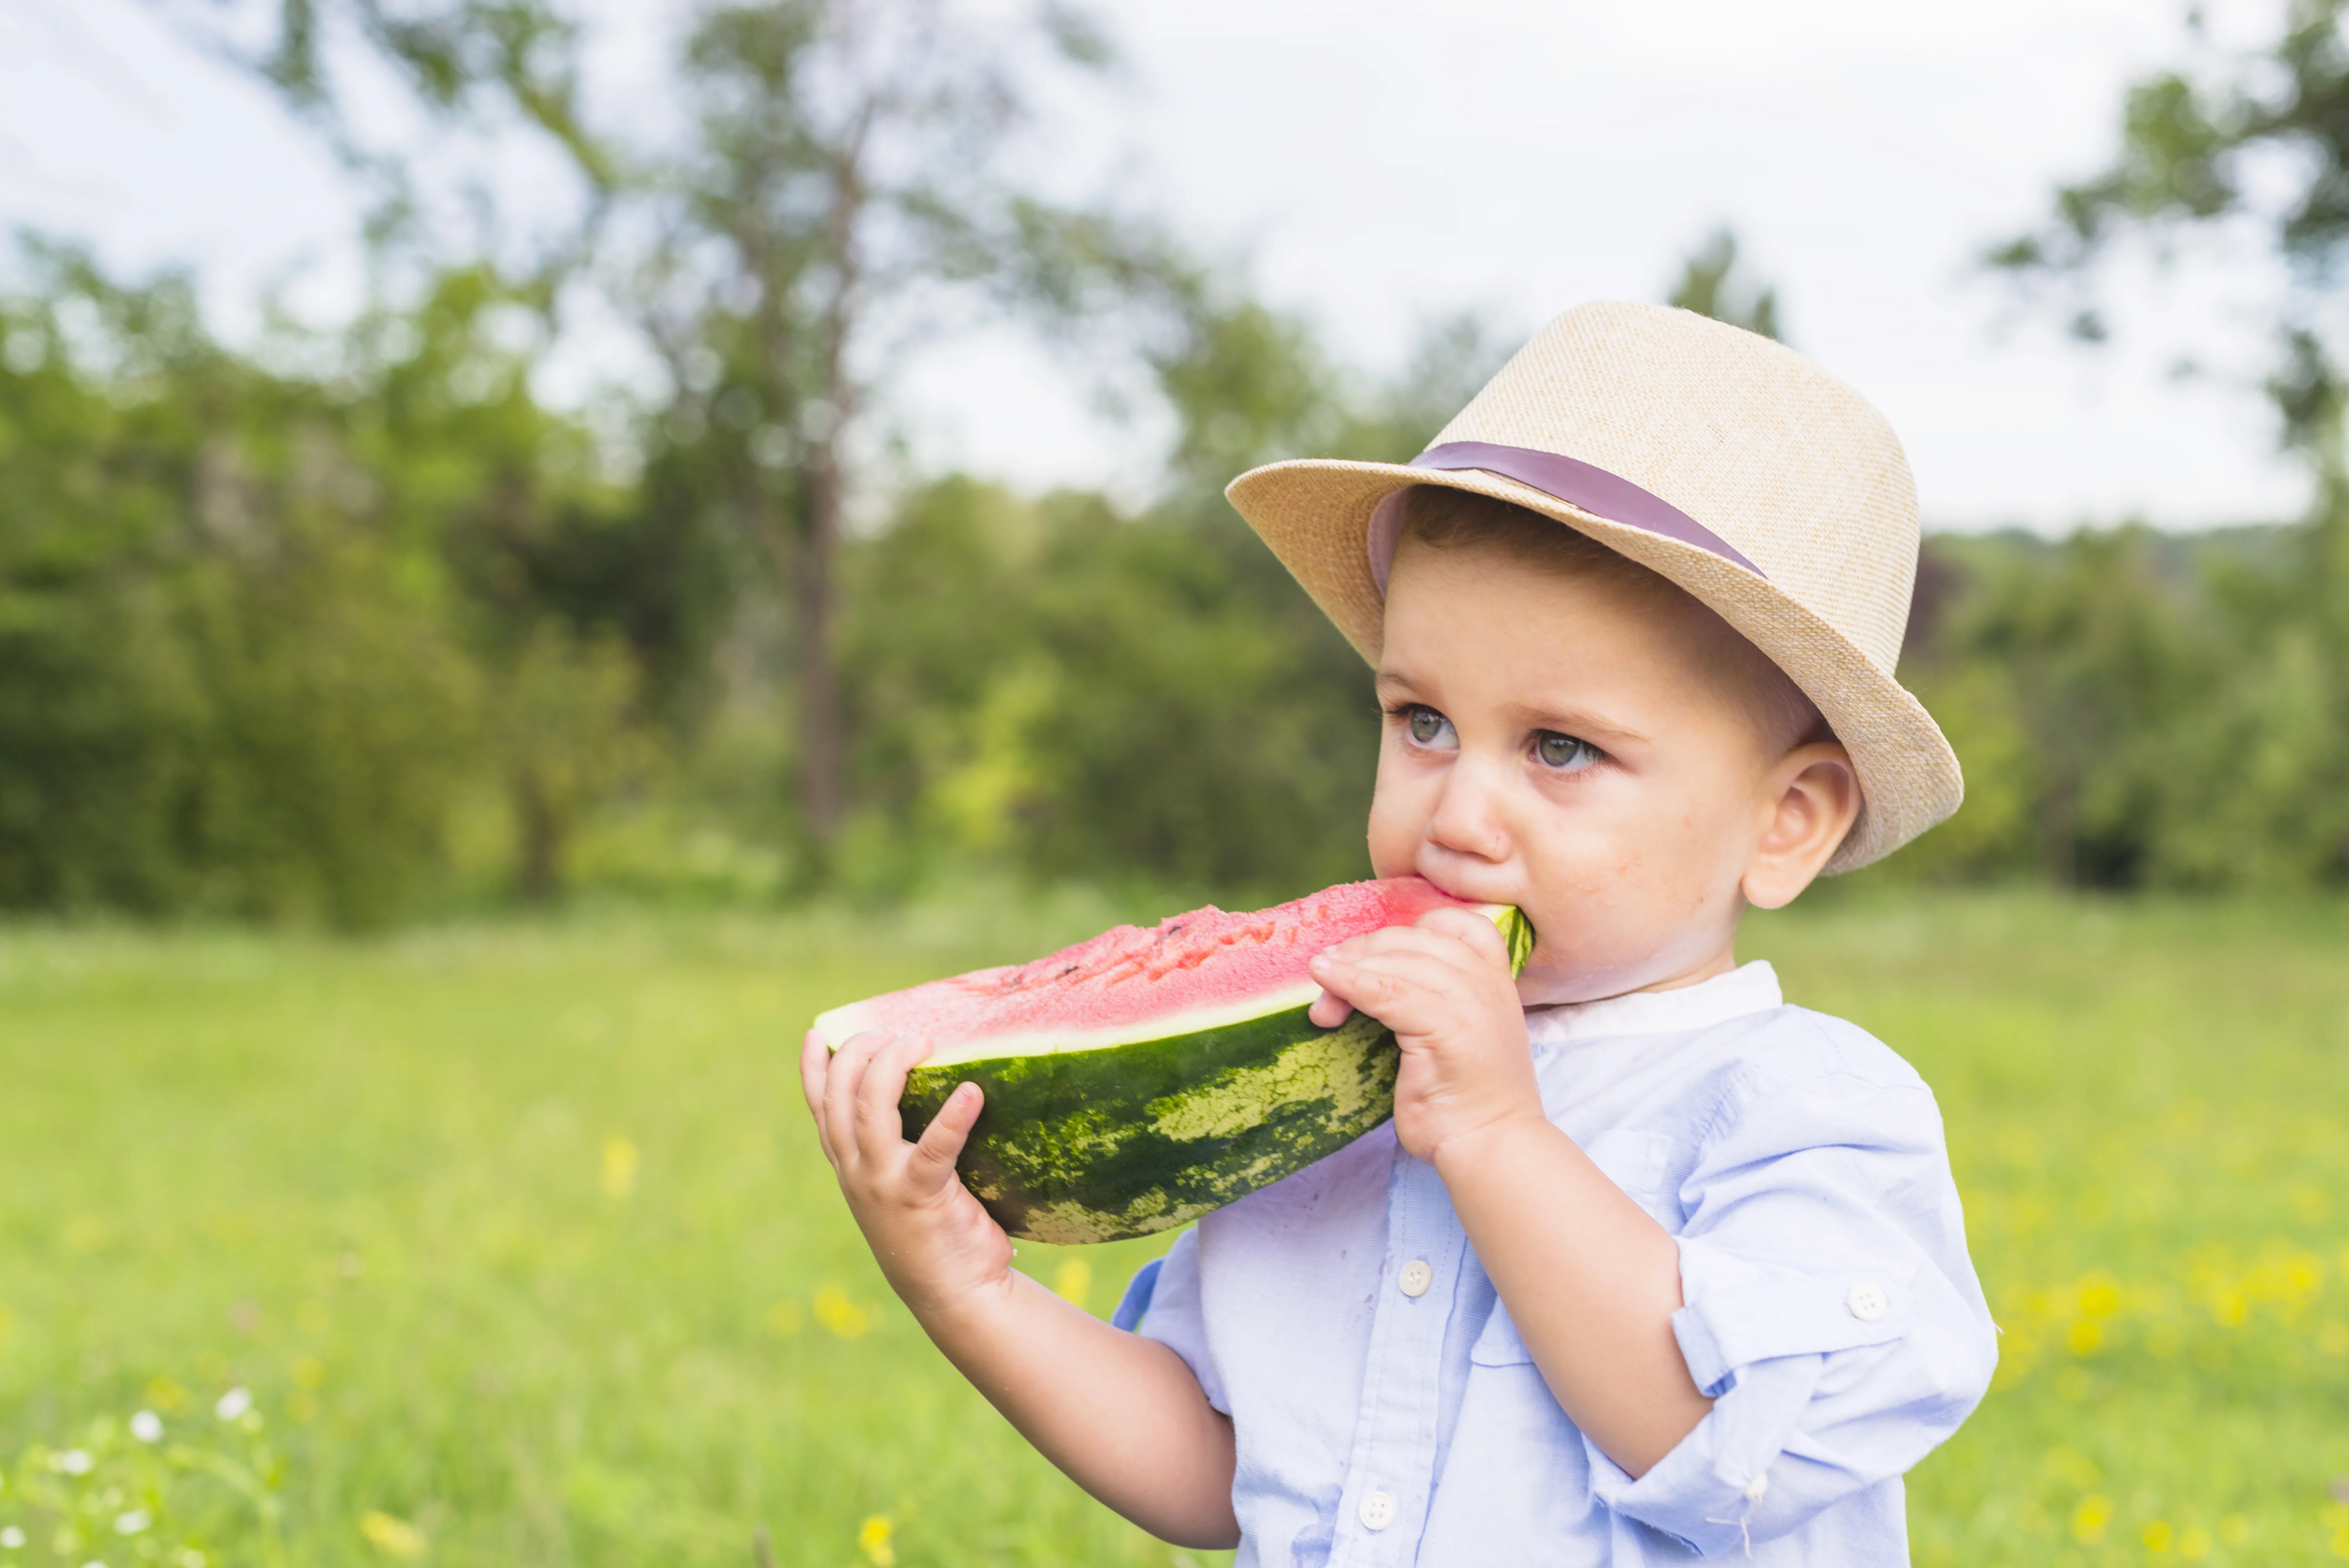 Изображение от <a href="https://ru.freepik.com/free-photo/close-up-of-boy-eating-watermelon-standing-in-the-park_3094569.htm#query=%D0%BC%D0%BE%D0%B6%D0%BD%D0%BE%20%D0%BB%D0%B8%20%D0%B4%D0%B5%D1%82%D1%8F%D0%BC%20%D0%B4%D0%B0%D0%B2%D0%B0%D1%82%D1%8C%20%D0%B0%D1%80%D0%B1%D1%83%D0%B7&position=30&from_view=search&track=ais">Freepik</a>